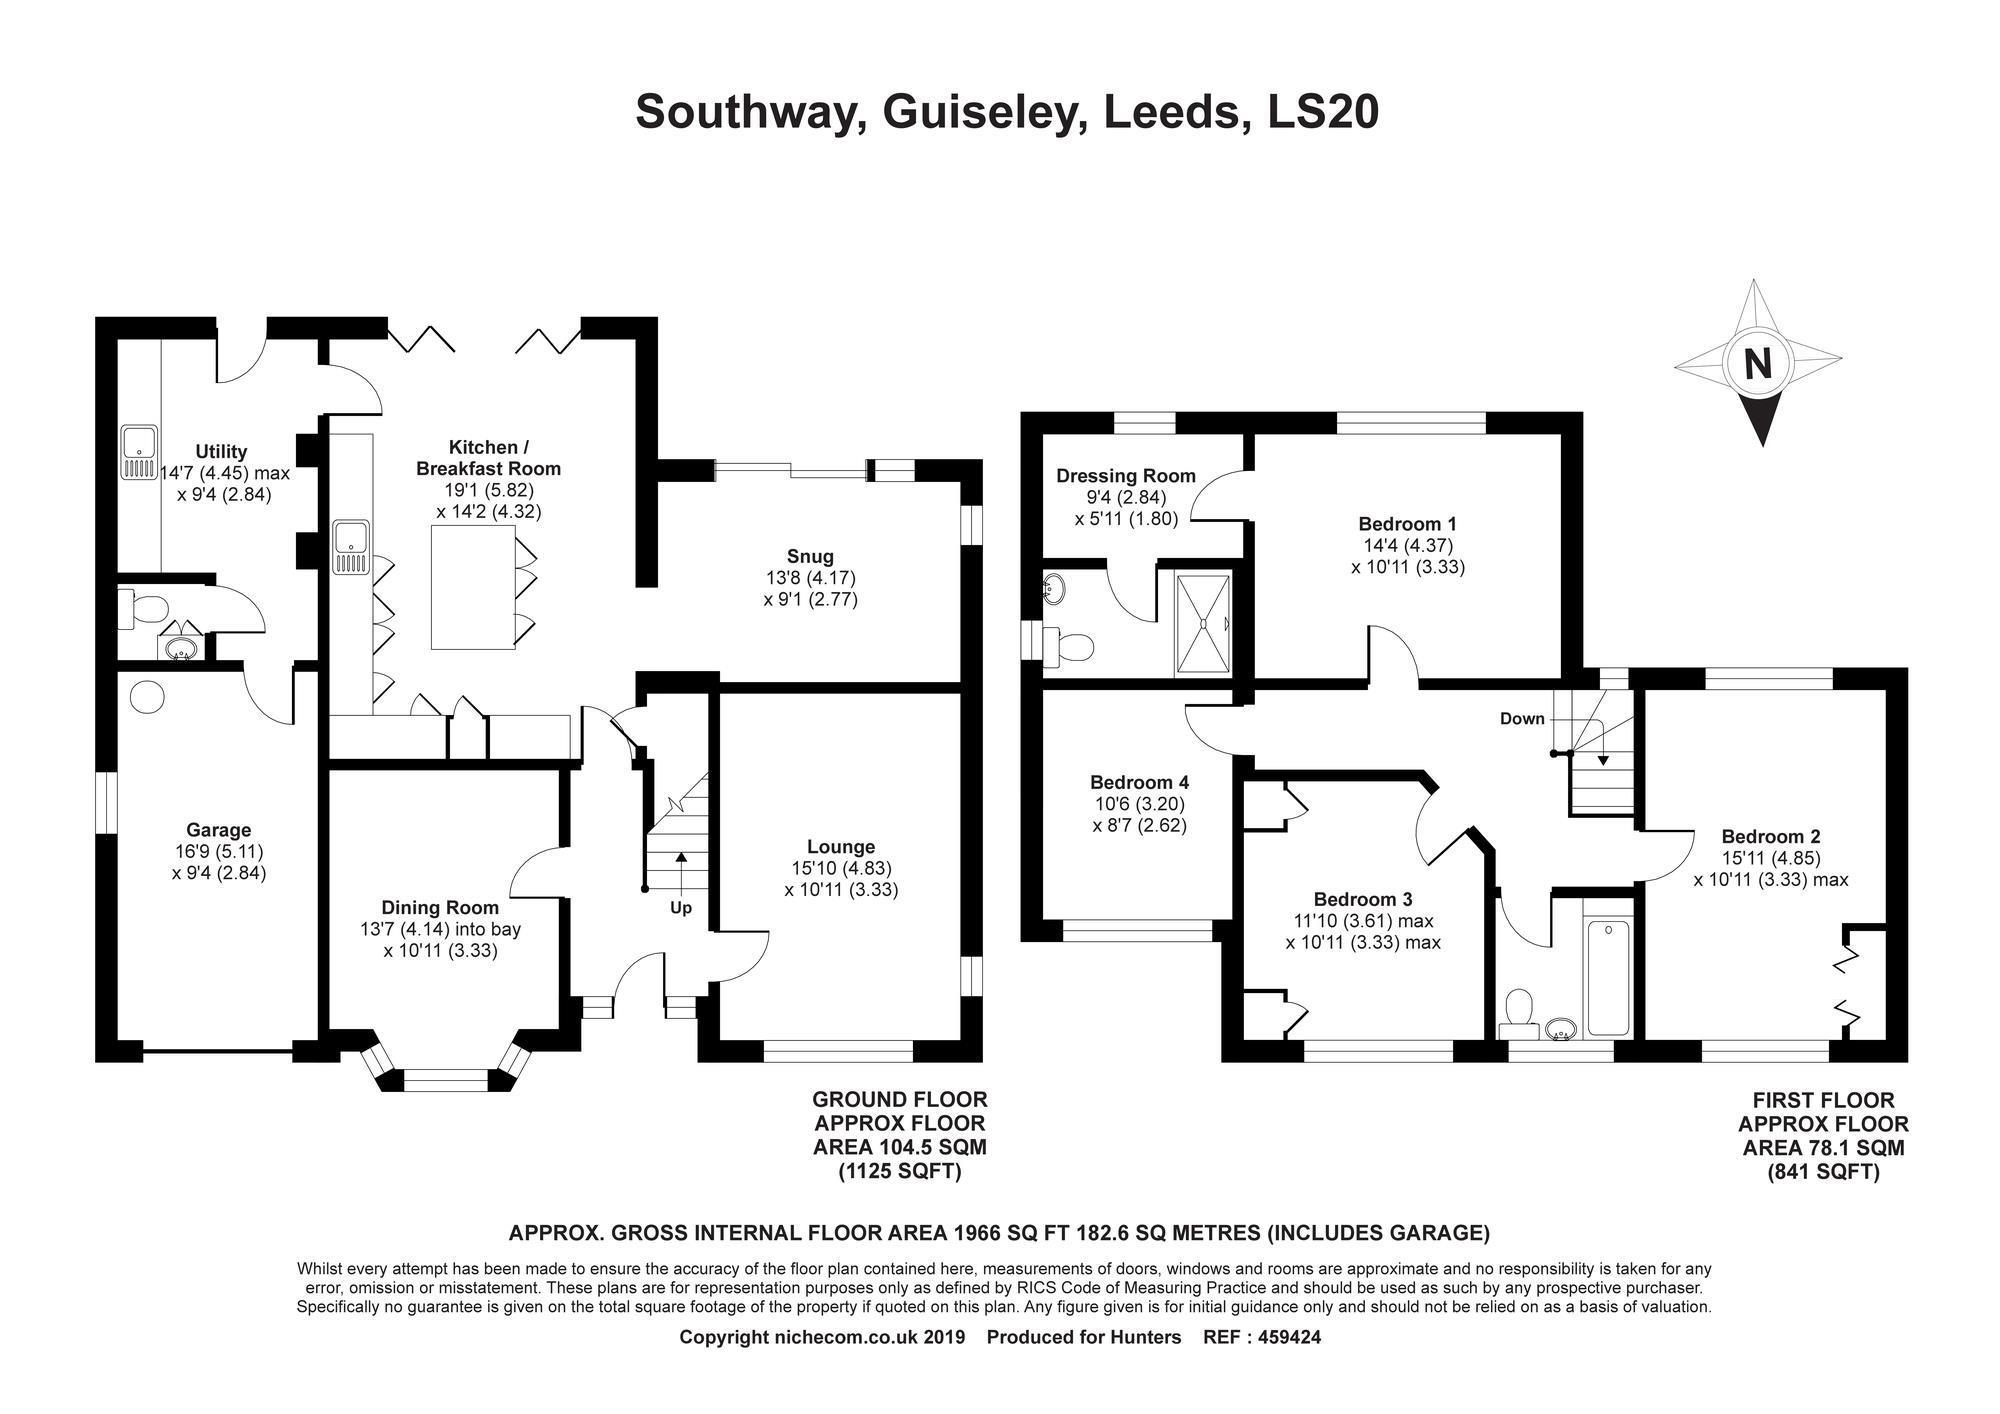 4 Bedrooms Detached house for sale in Southway, Guiseley, Leeds LS20